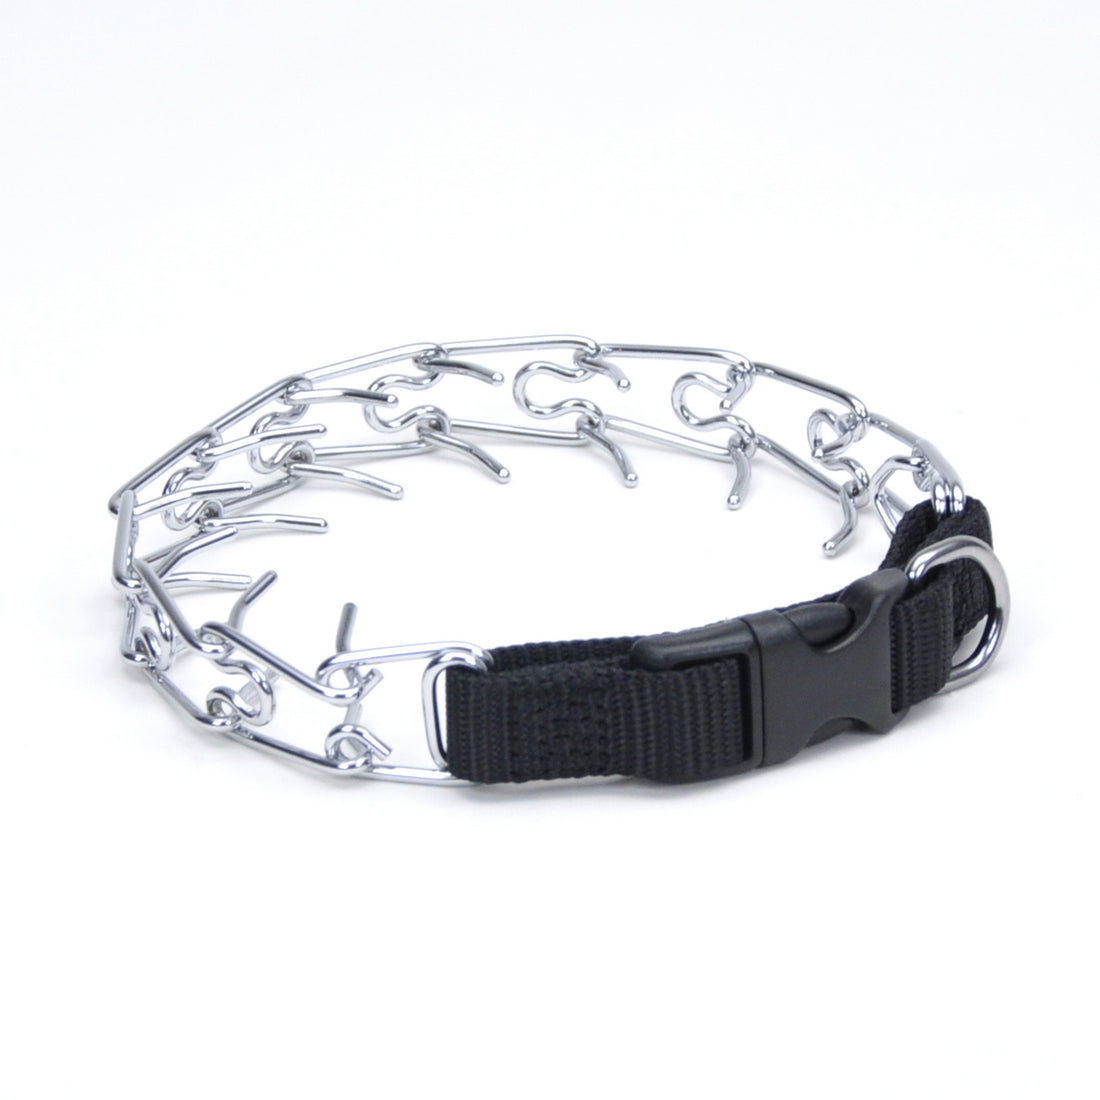 Coastal Easy On Prong Training Collar with Buckle 18"